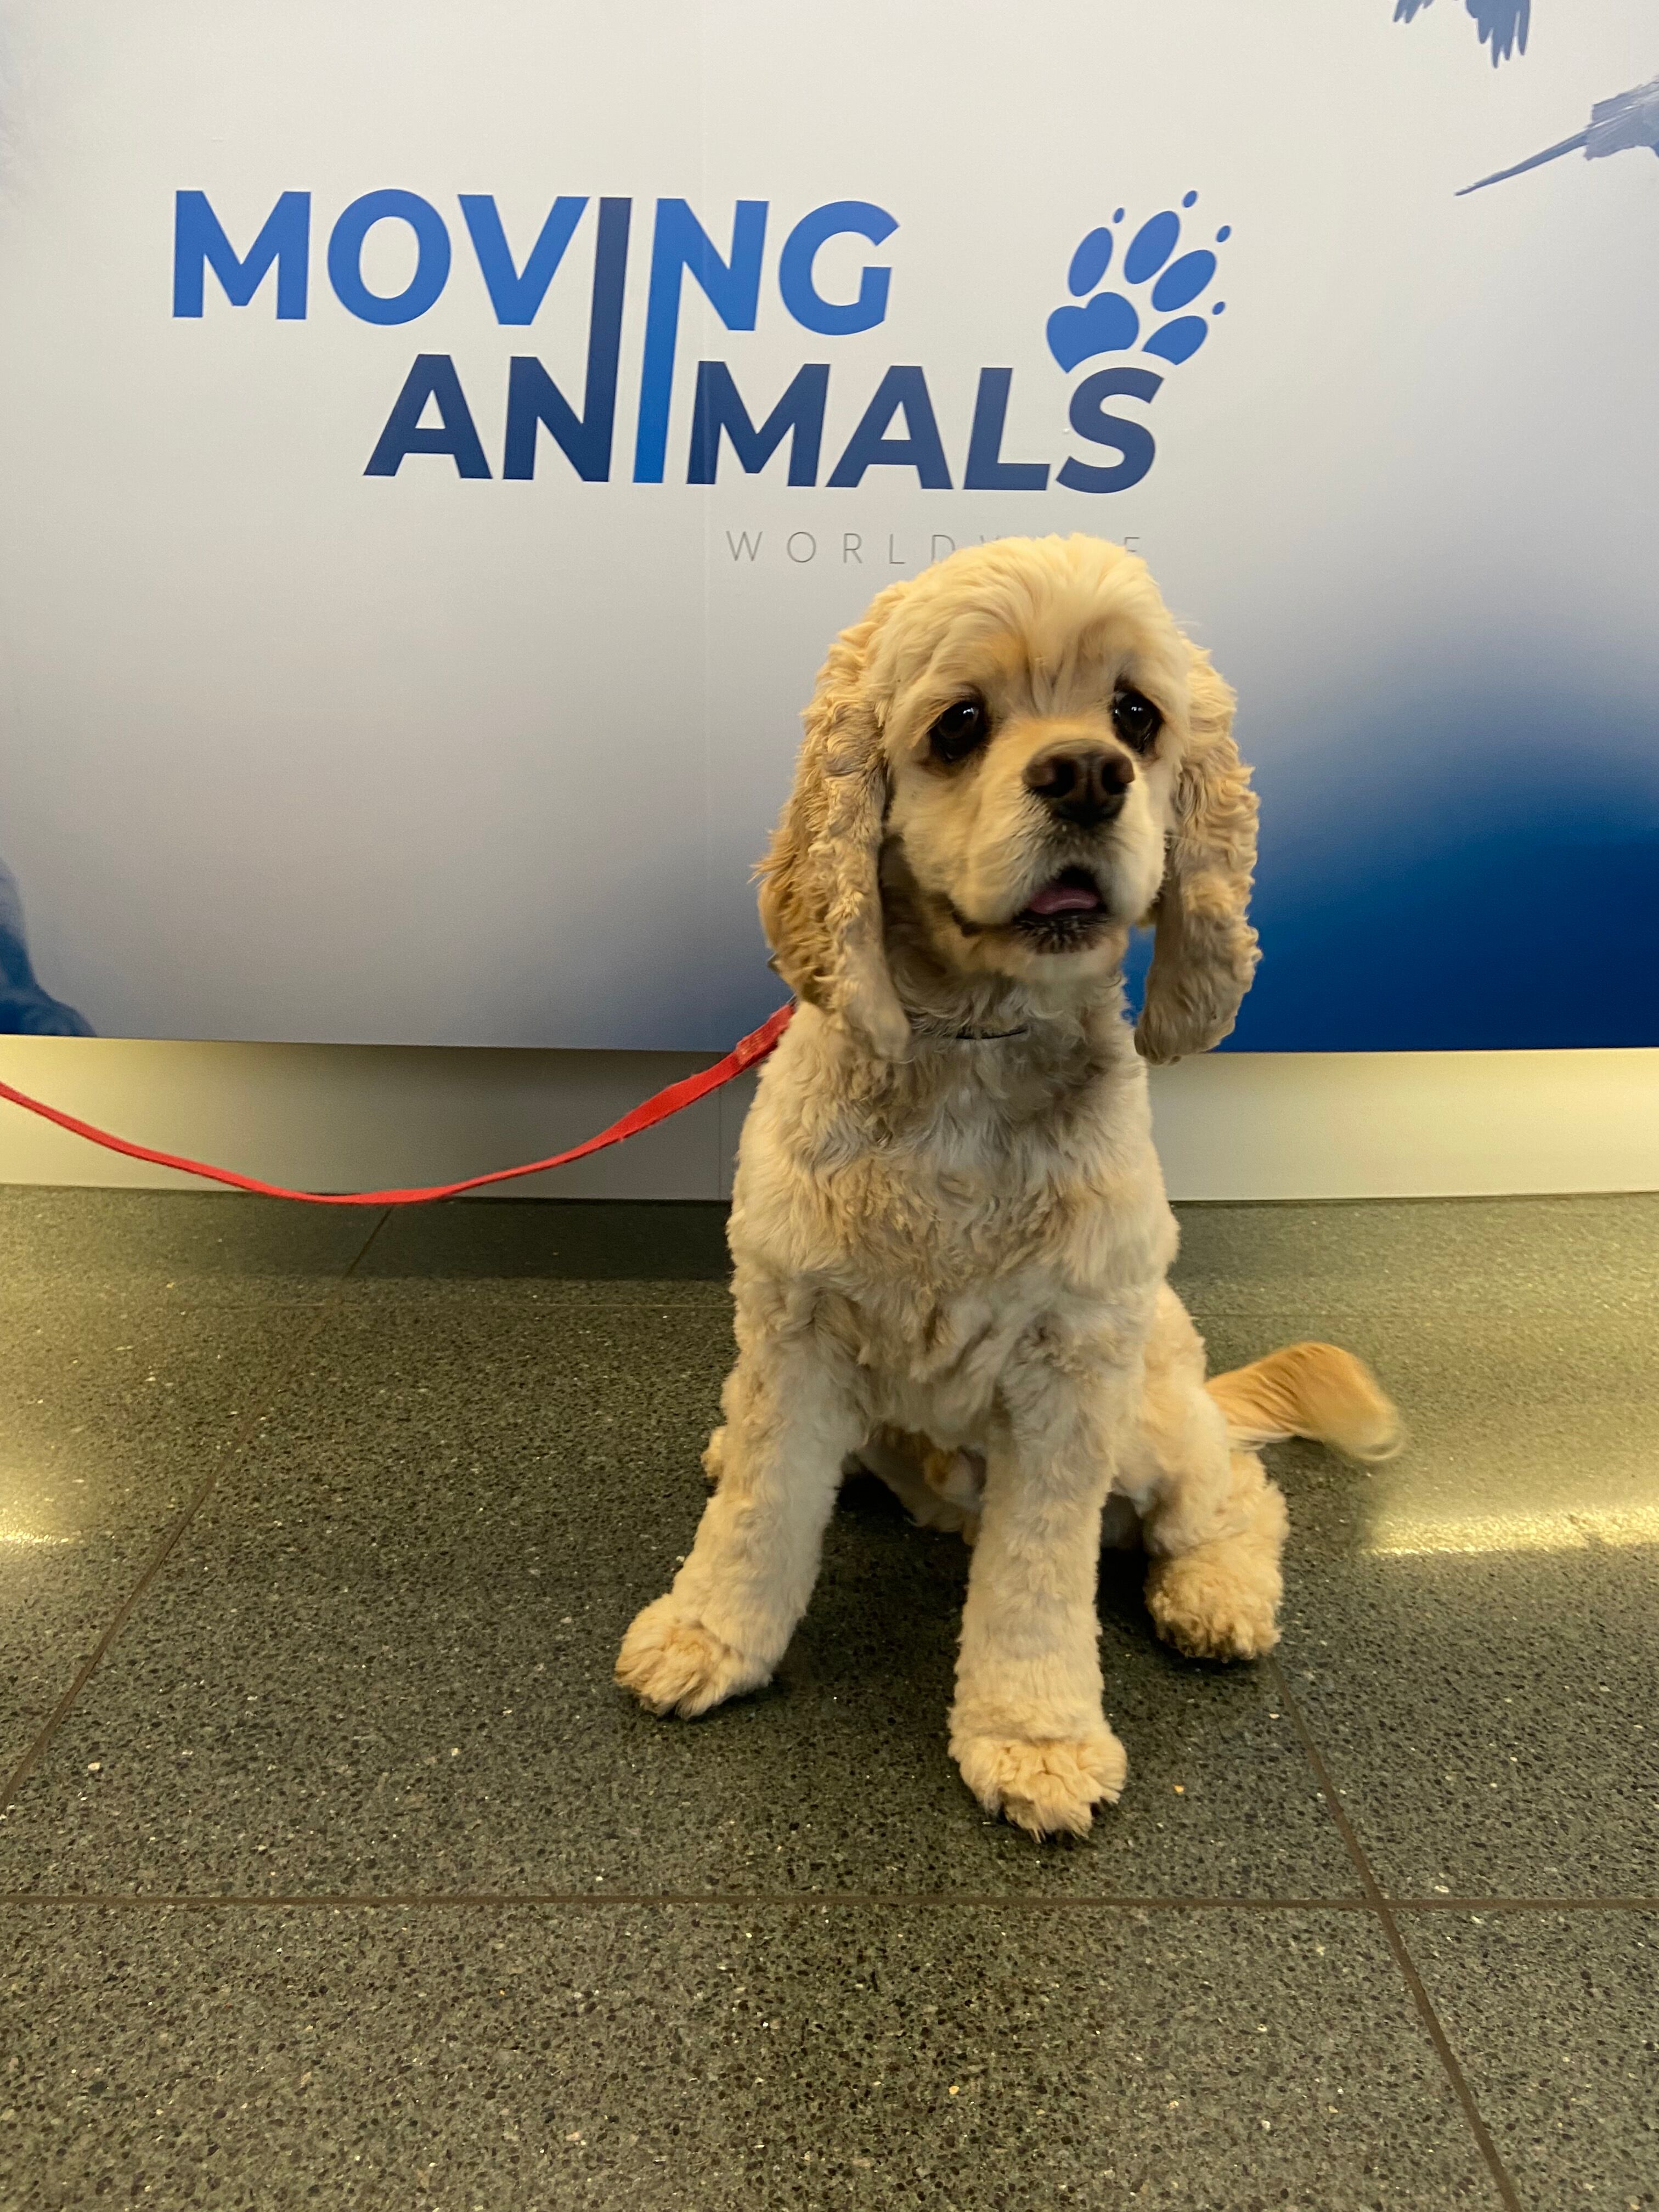 American Cocker Spaniel to fly from Zurich to Dubai, MOCCAE import permit for dogs to enter Dubai, UAE, manifested cargo bookings for dogs into Dubai DXB